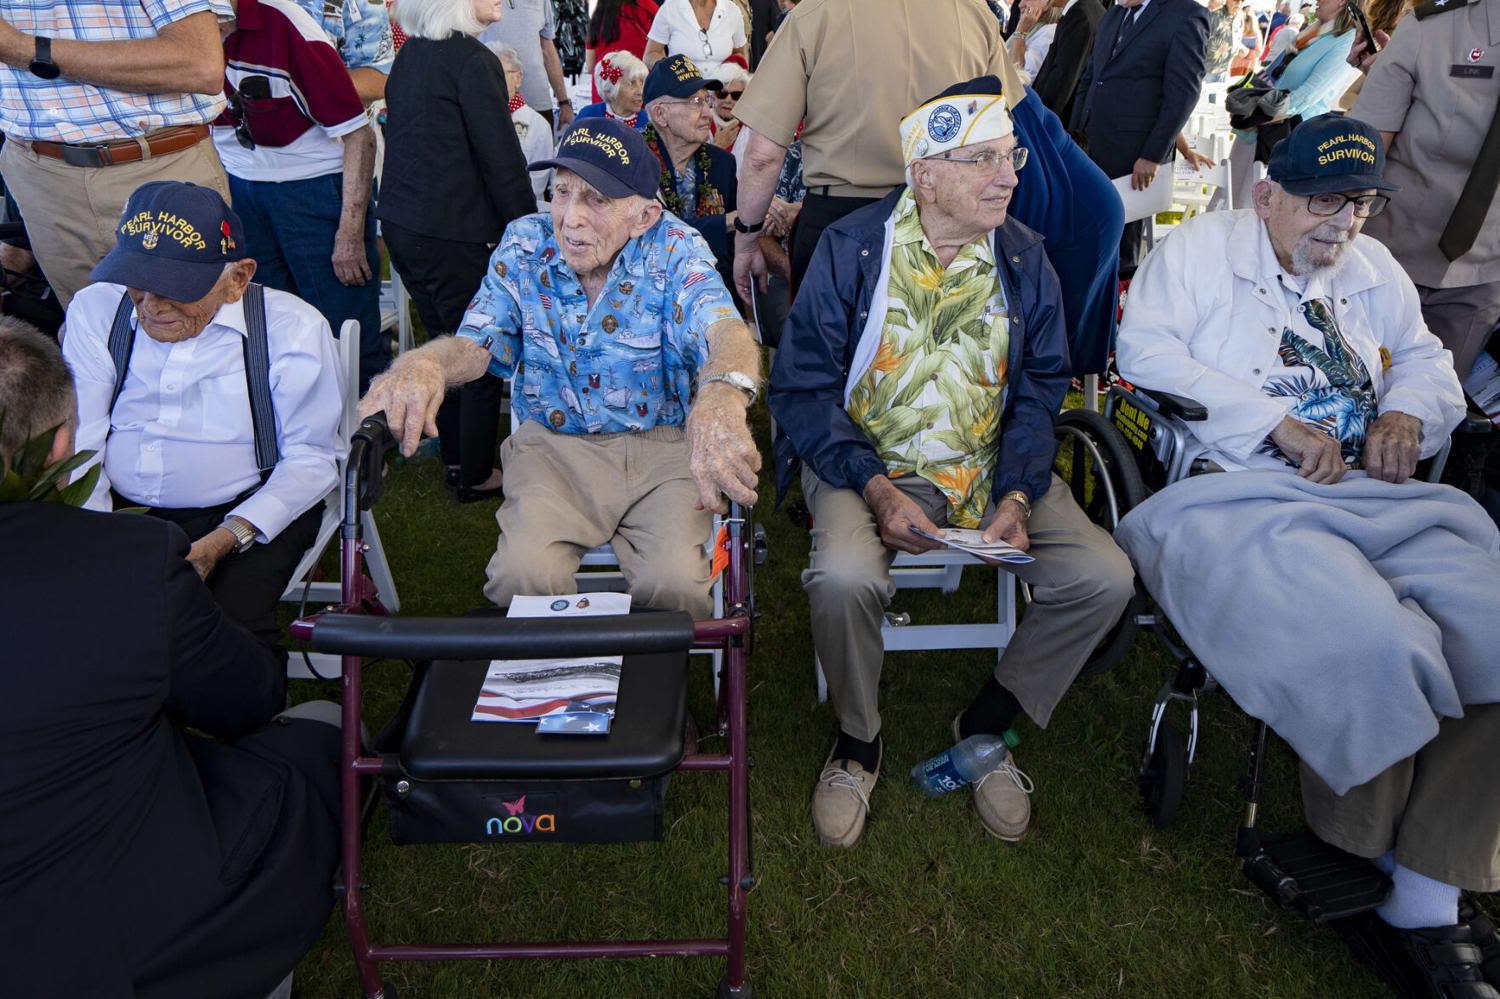 Song at party evokes emotional Pearl Harbor memories